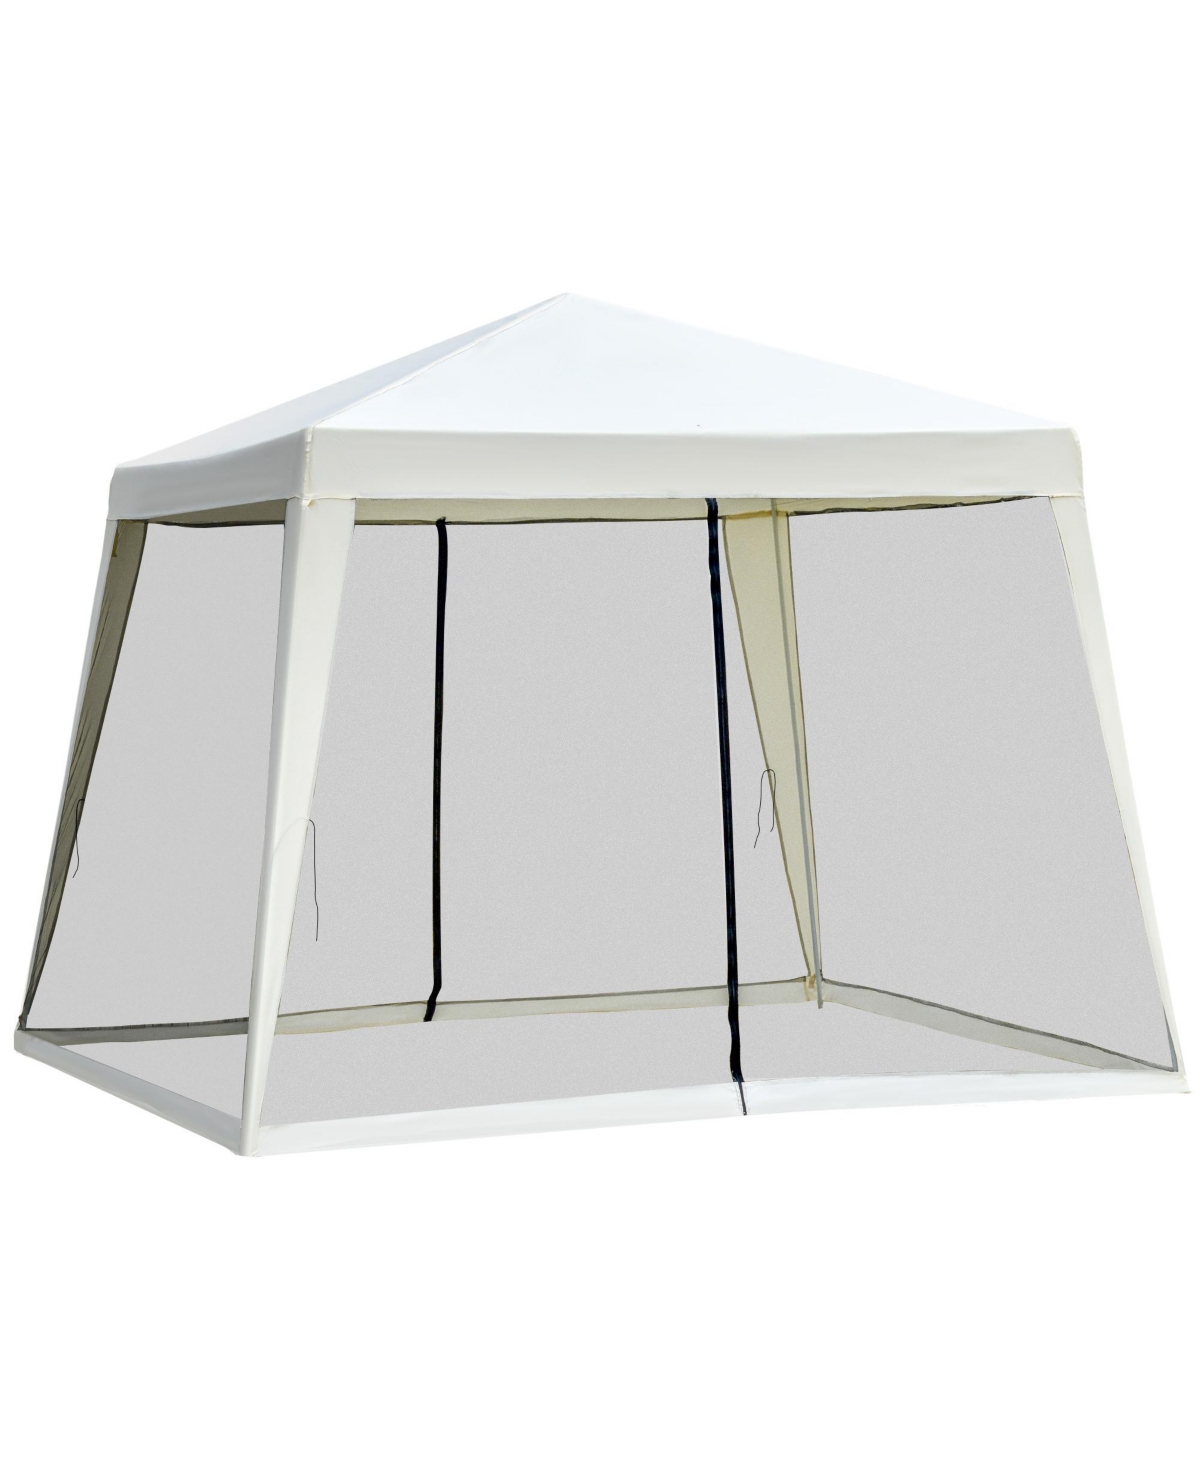 10'x10' Outdoor Party Tent Canopy with Mesh Sidewalls, Patio Gazebo Sun Shade Screen Shelter, Beige - White